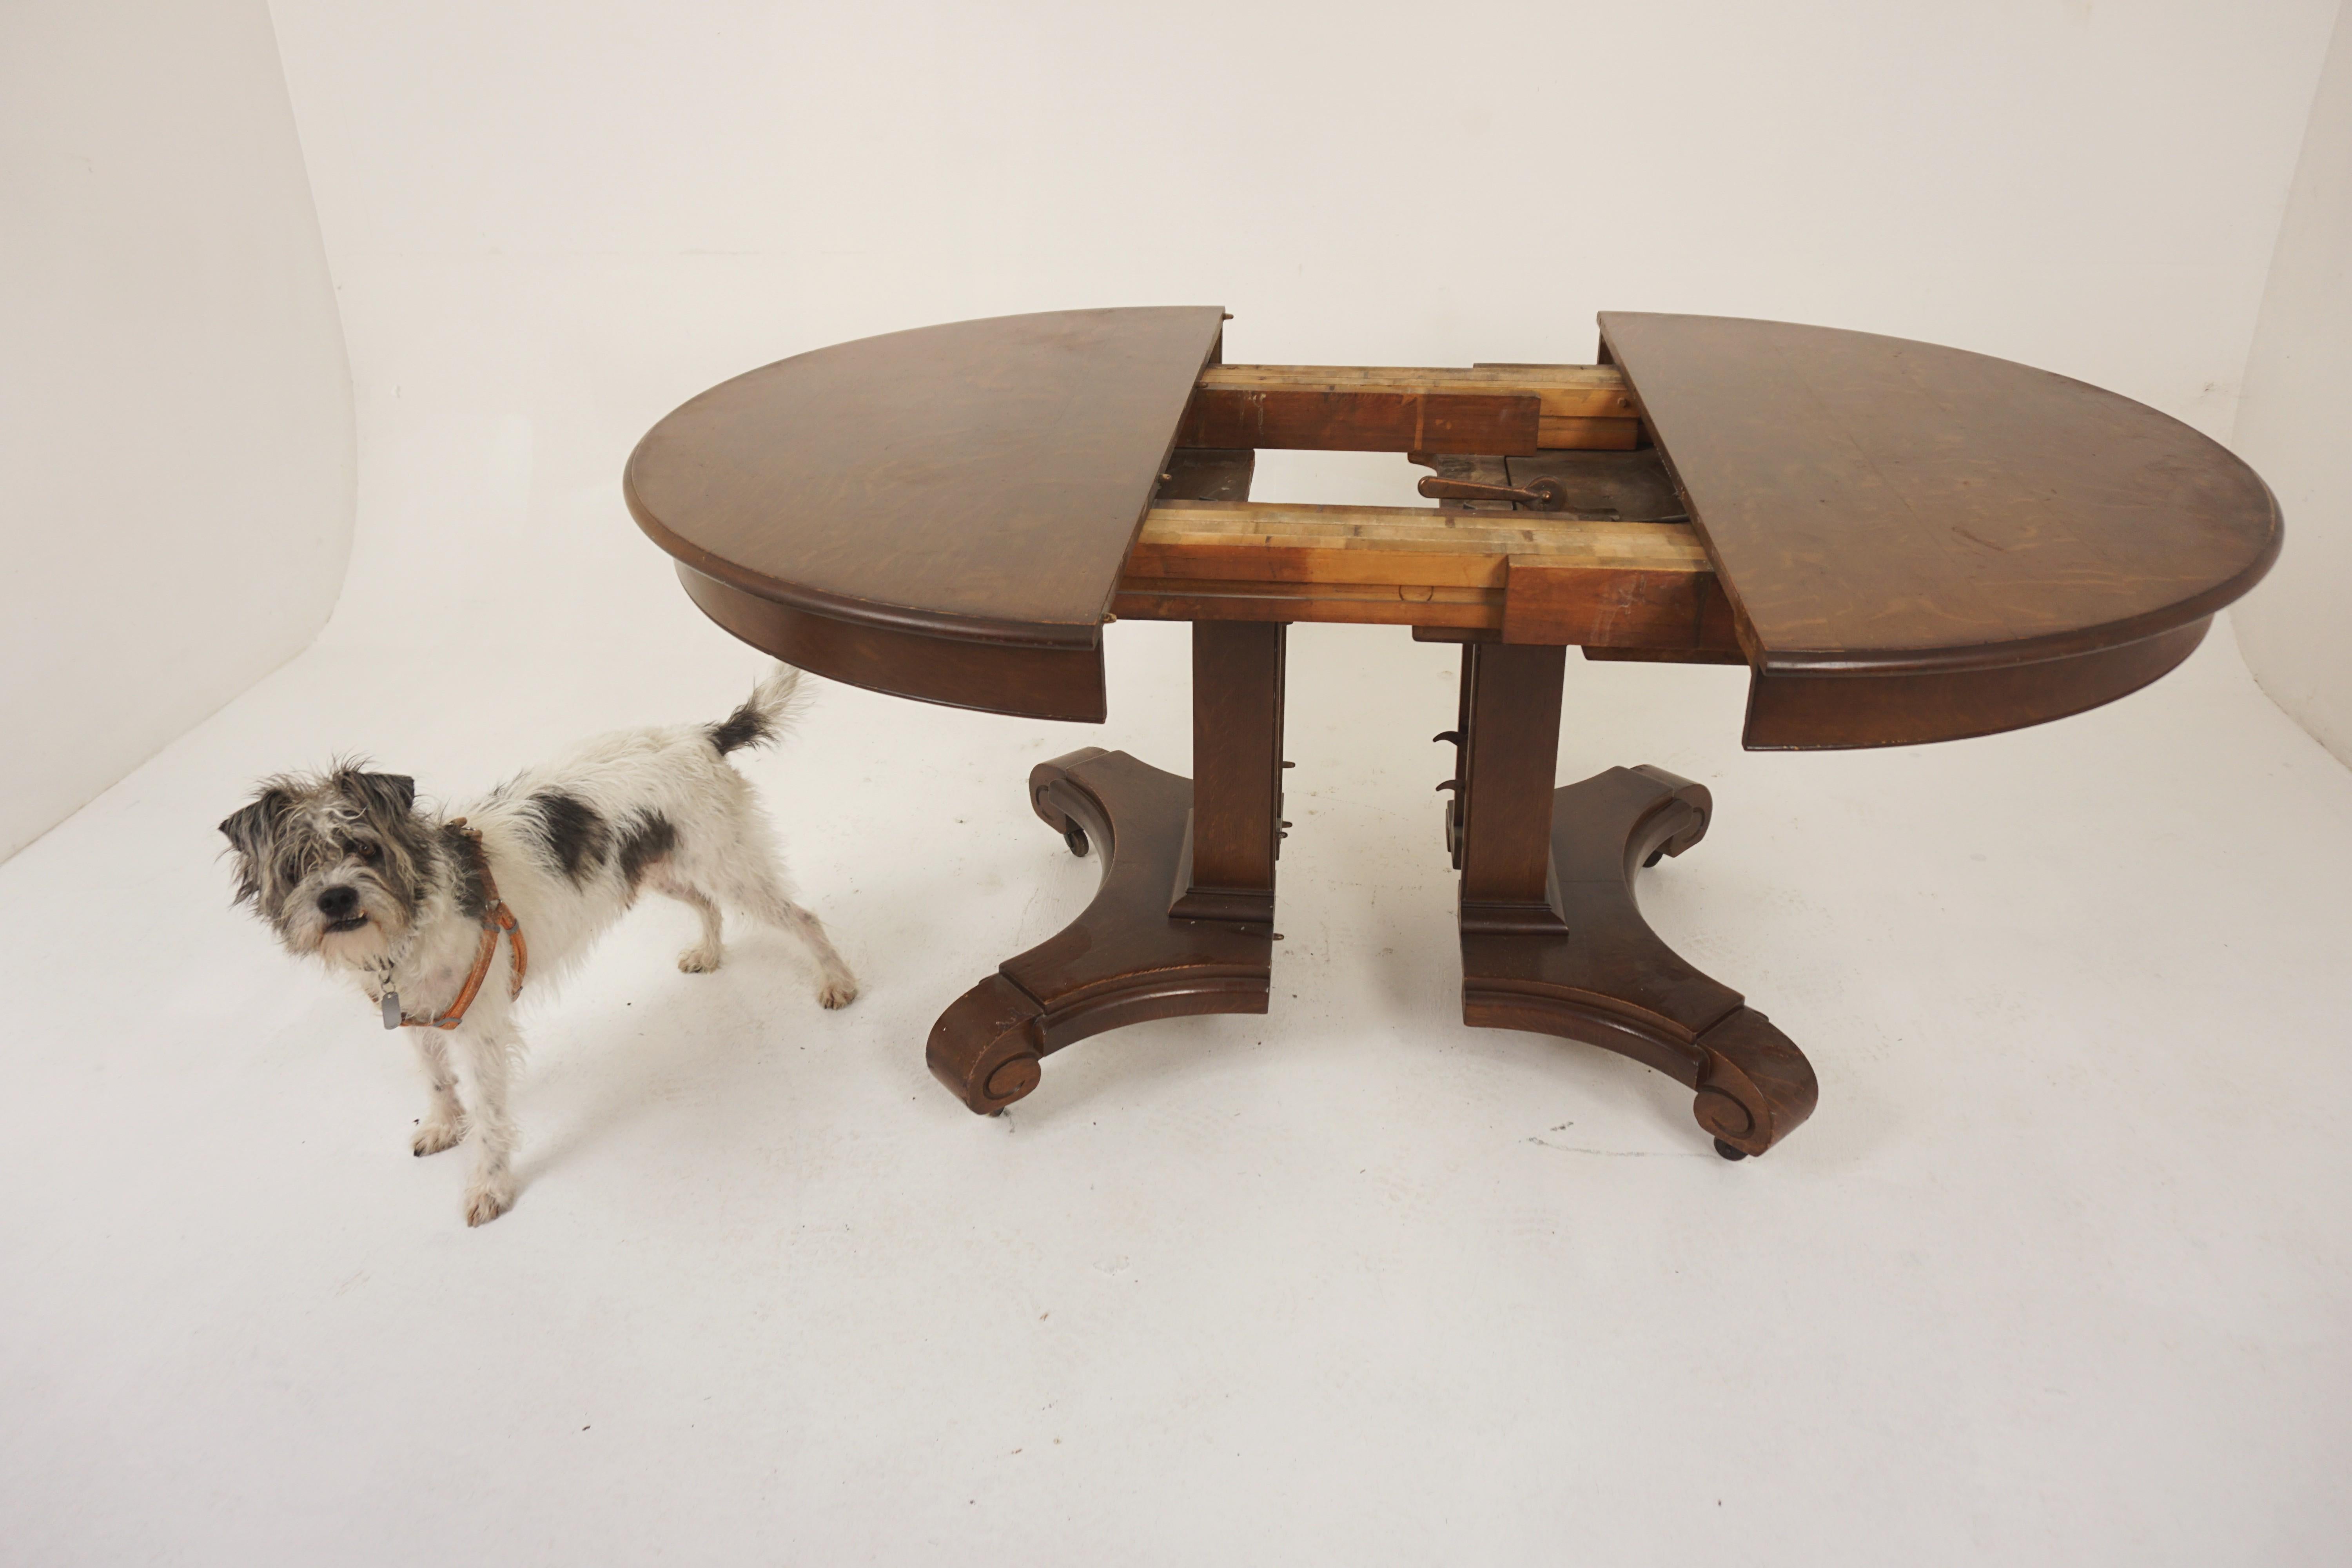 Early 20th Century Mission Tiger Oak Arts & Crafts Round Dining Table 3 Leaves, America 1920, H1197